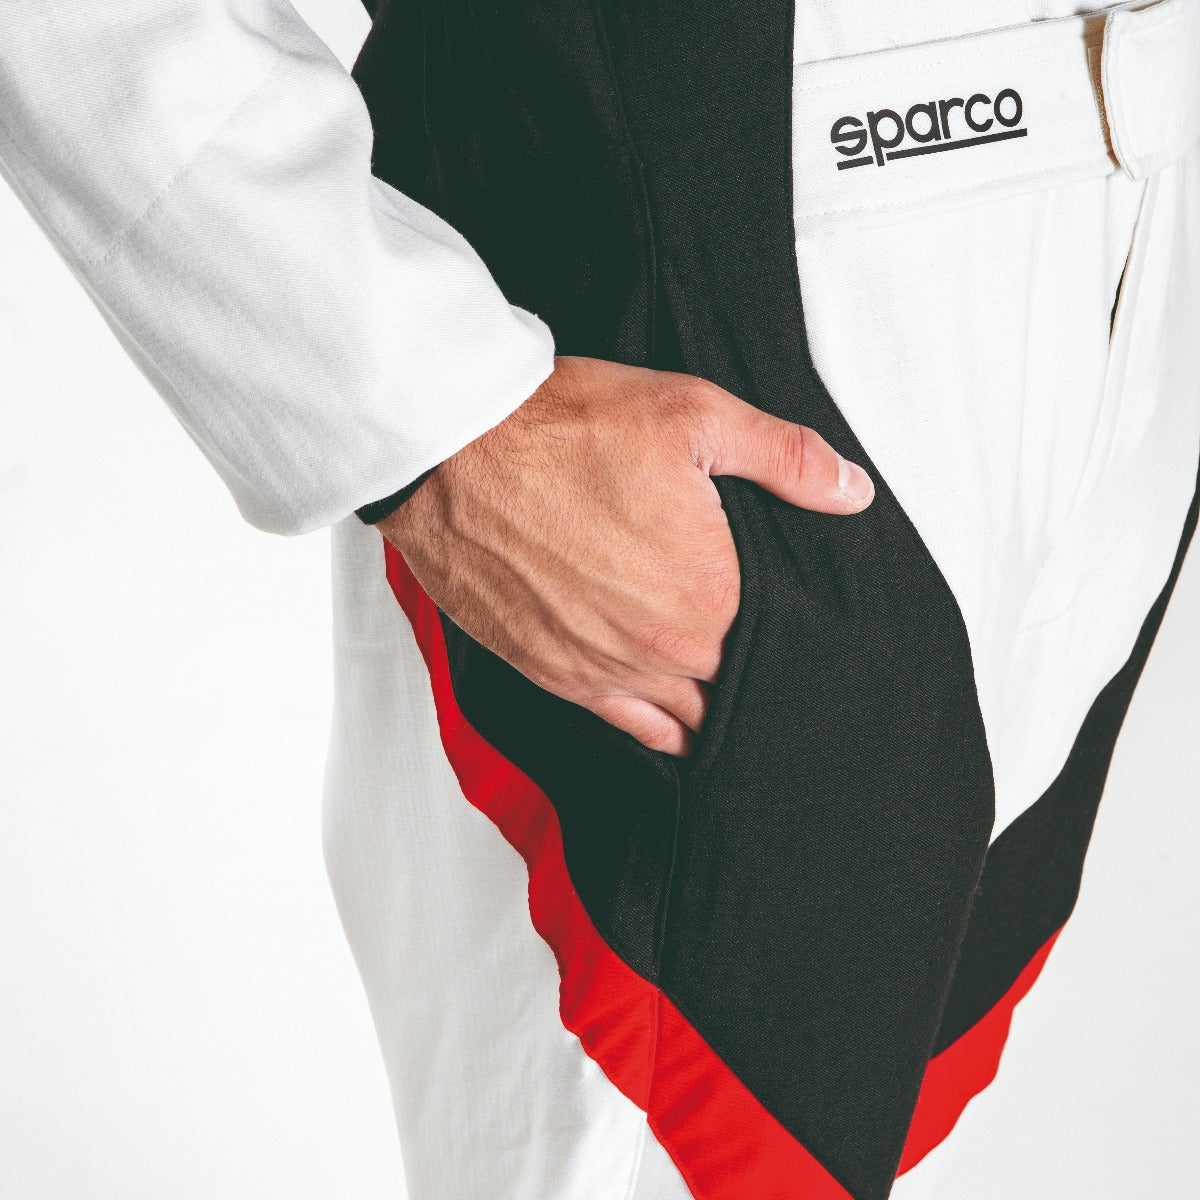  SPARCO VICTORY RACE SUIT WHITE / RED POCKET IMAGE